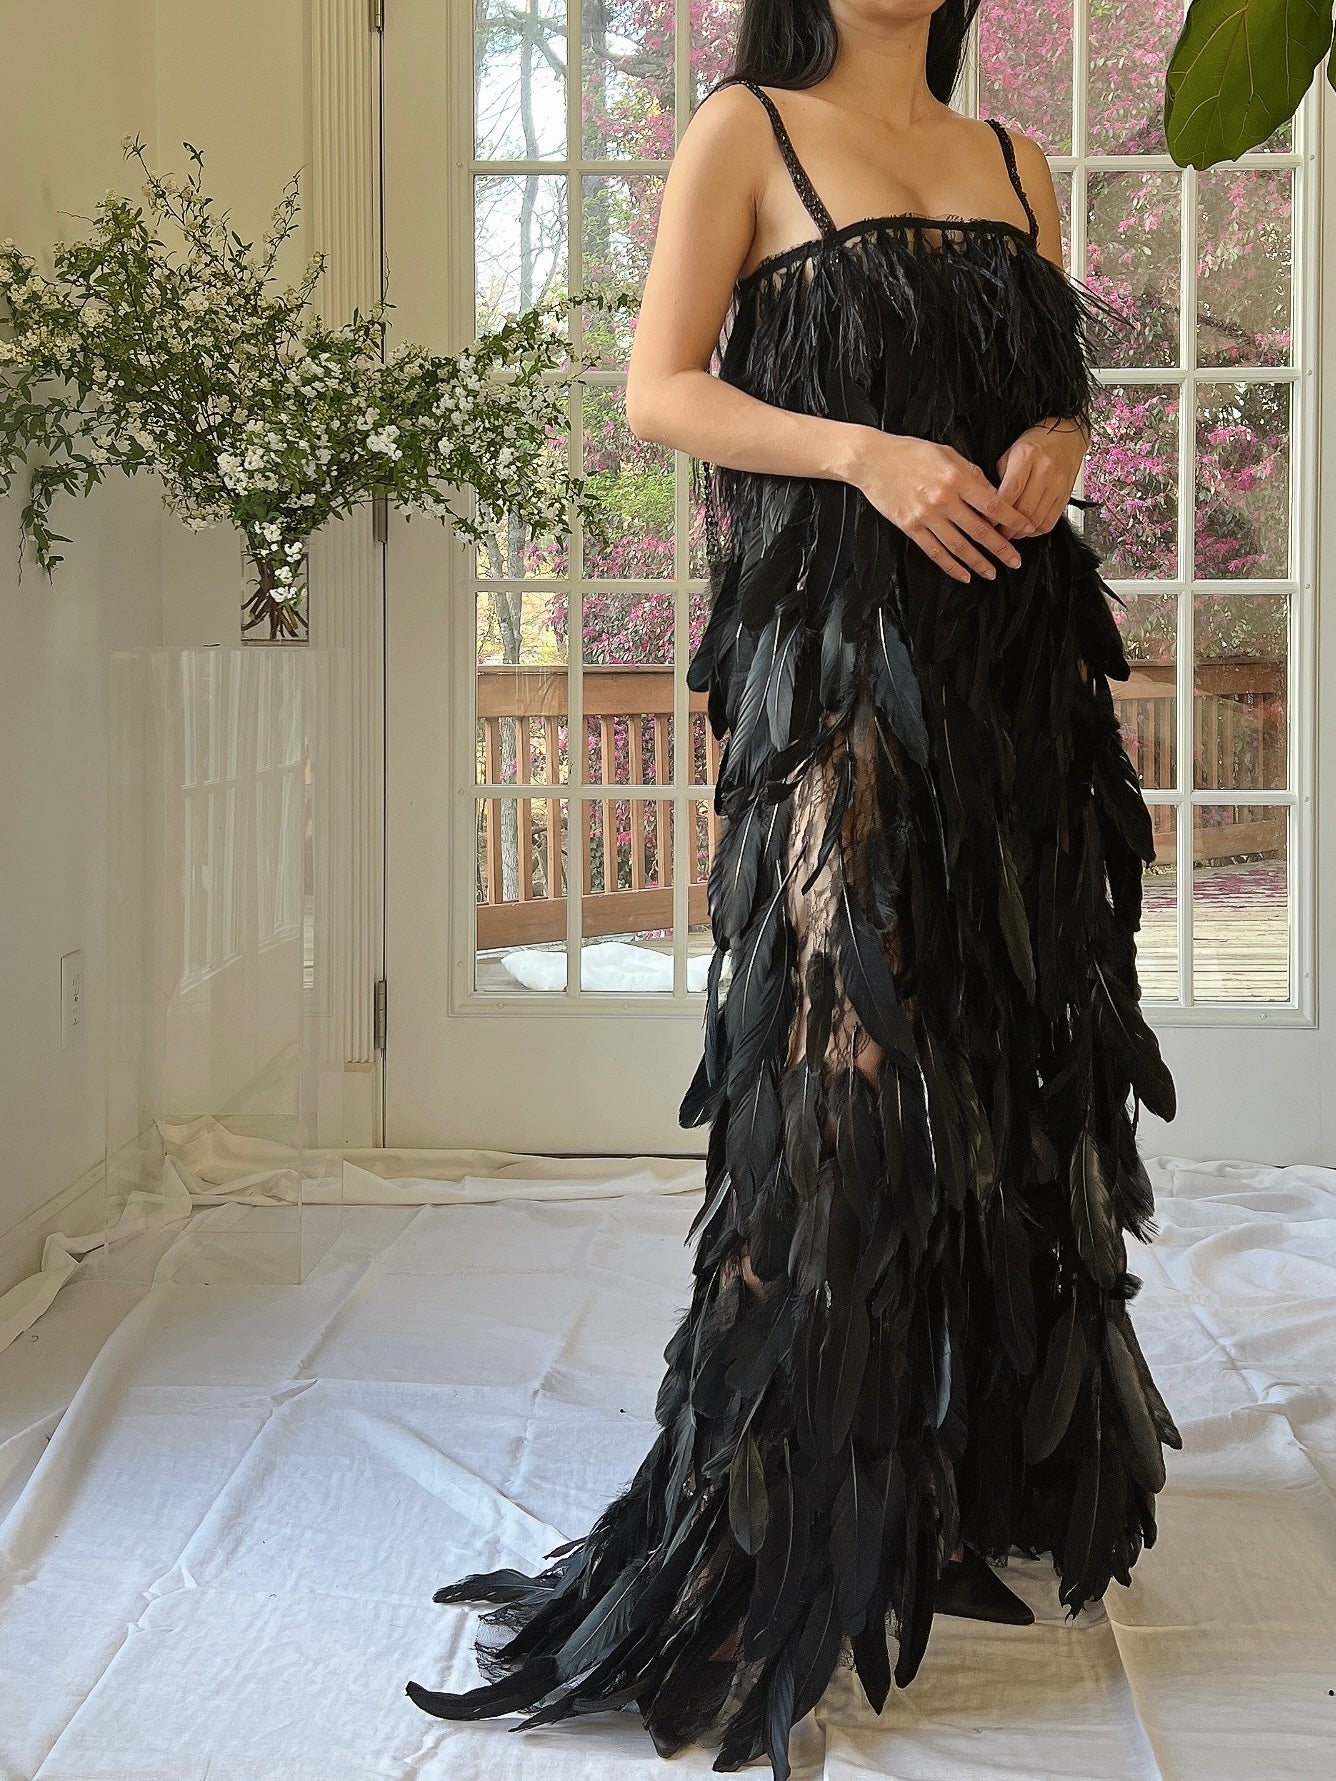 Vintage Feather and Lace Gown - S/M